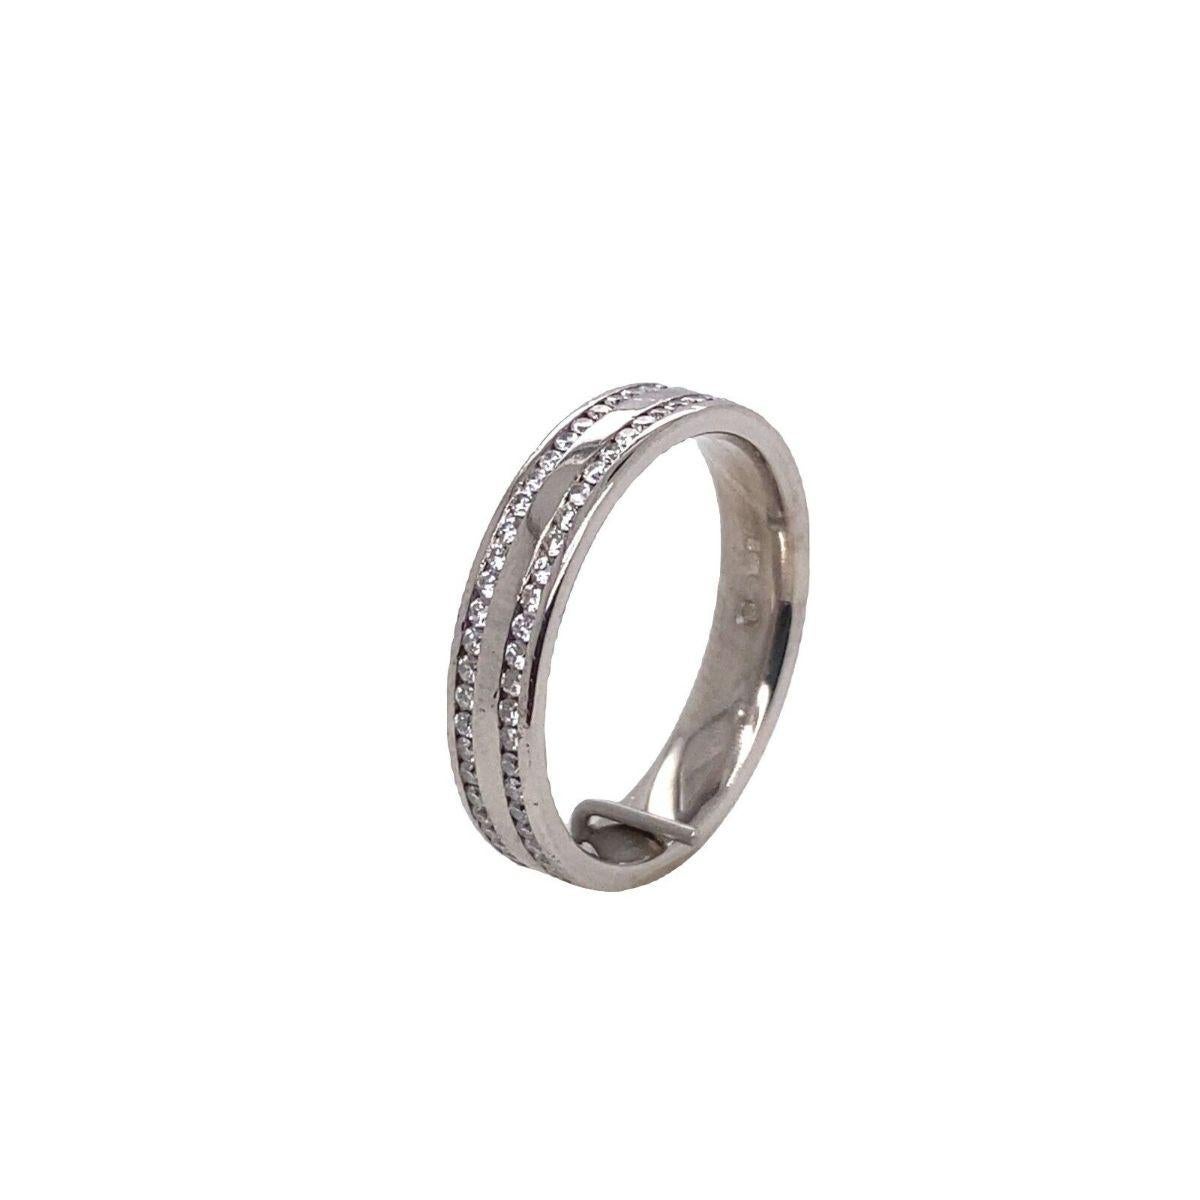 2-Row Diamond Full Set Diamond Wedding Band, 0.50ct

This wedding band is gorgeous and can be worn as an eternity ring, wedding band, it features 2 row of 0.50ct Diamonds set into a 18ct White Gold shank. The diamonds are all round brilliant cut,